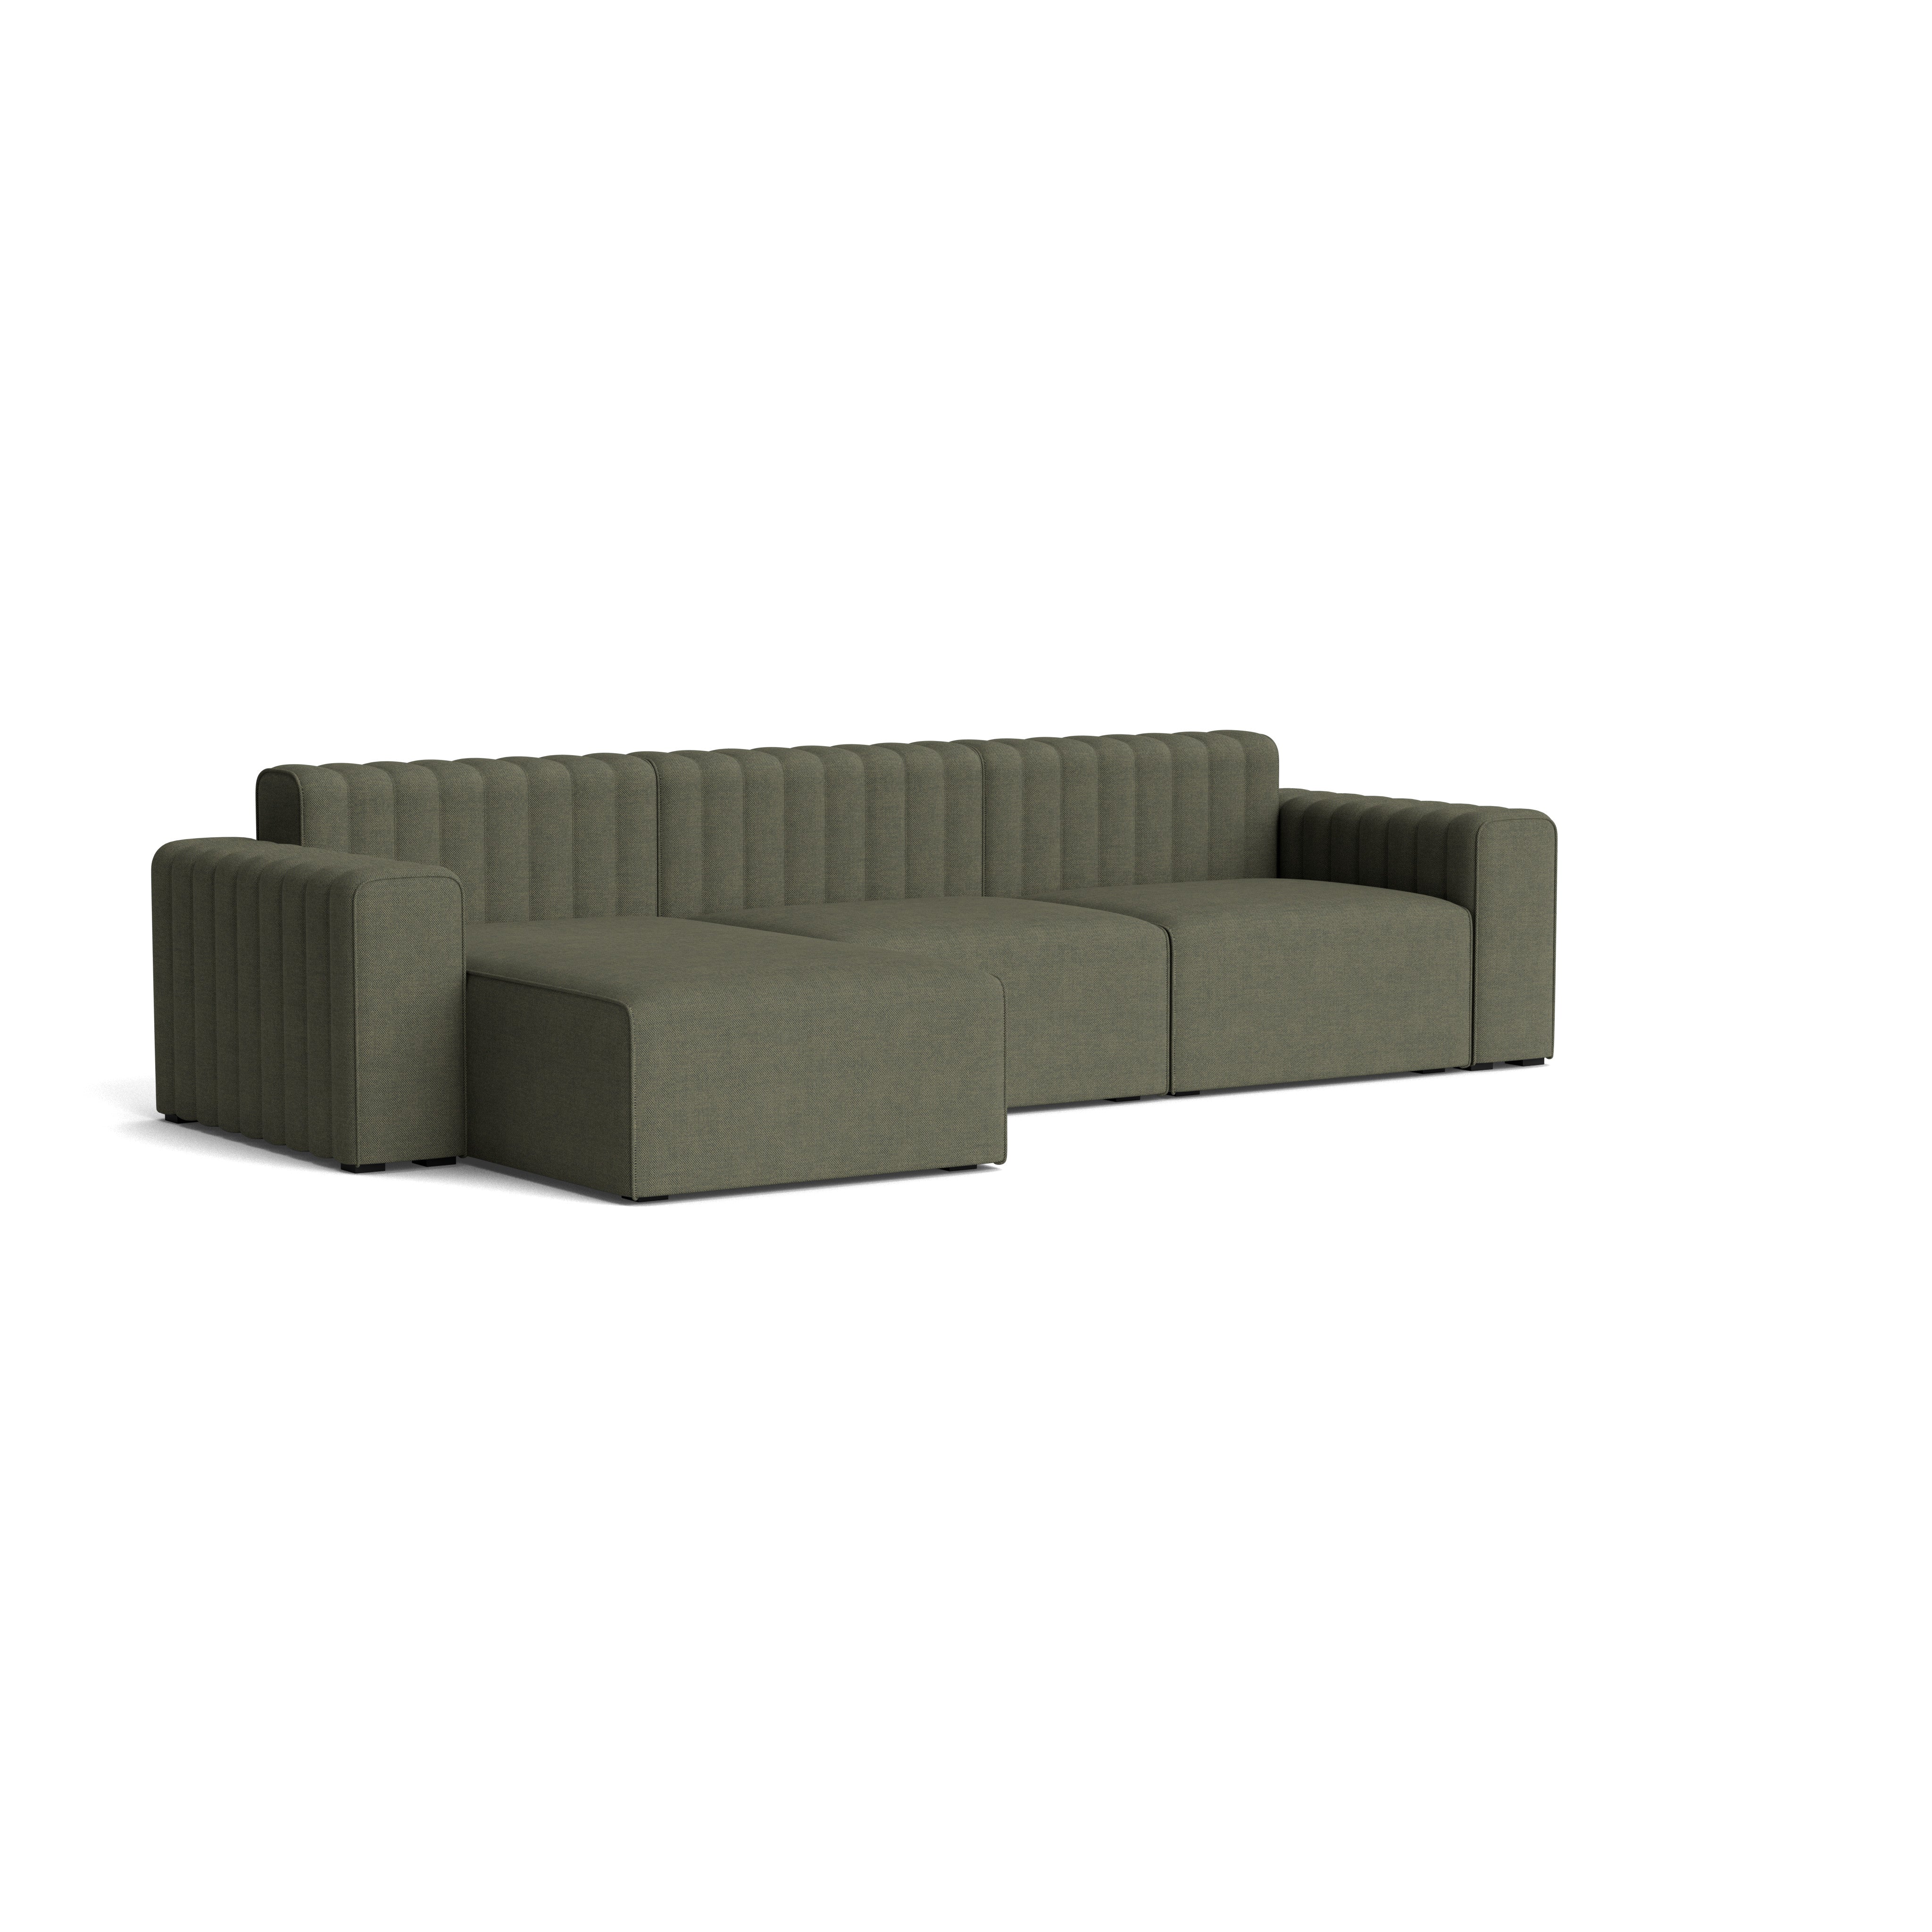 RIFF Sofa, Three Seater with Chaise Lounge Right (Left Arm, Center, Chaise Longue Right)